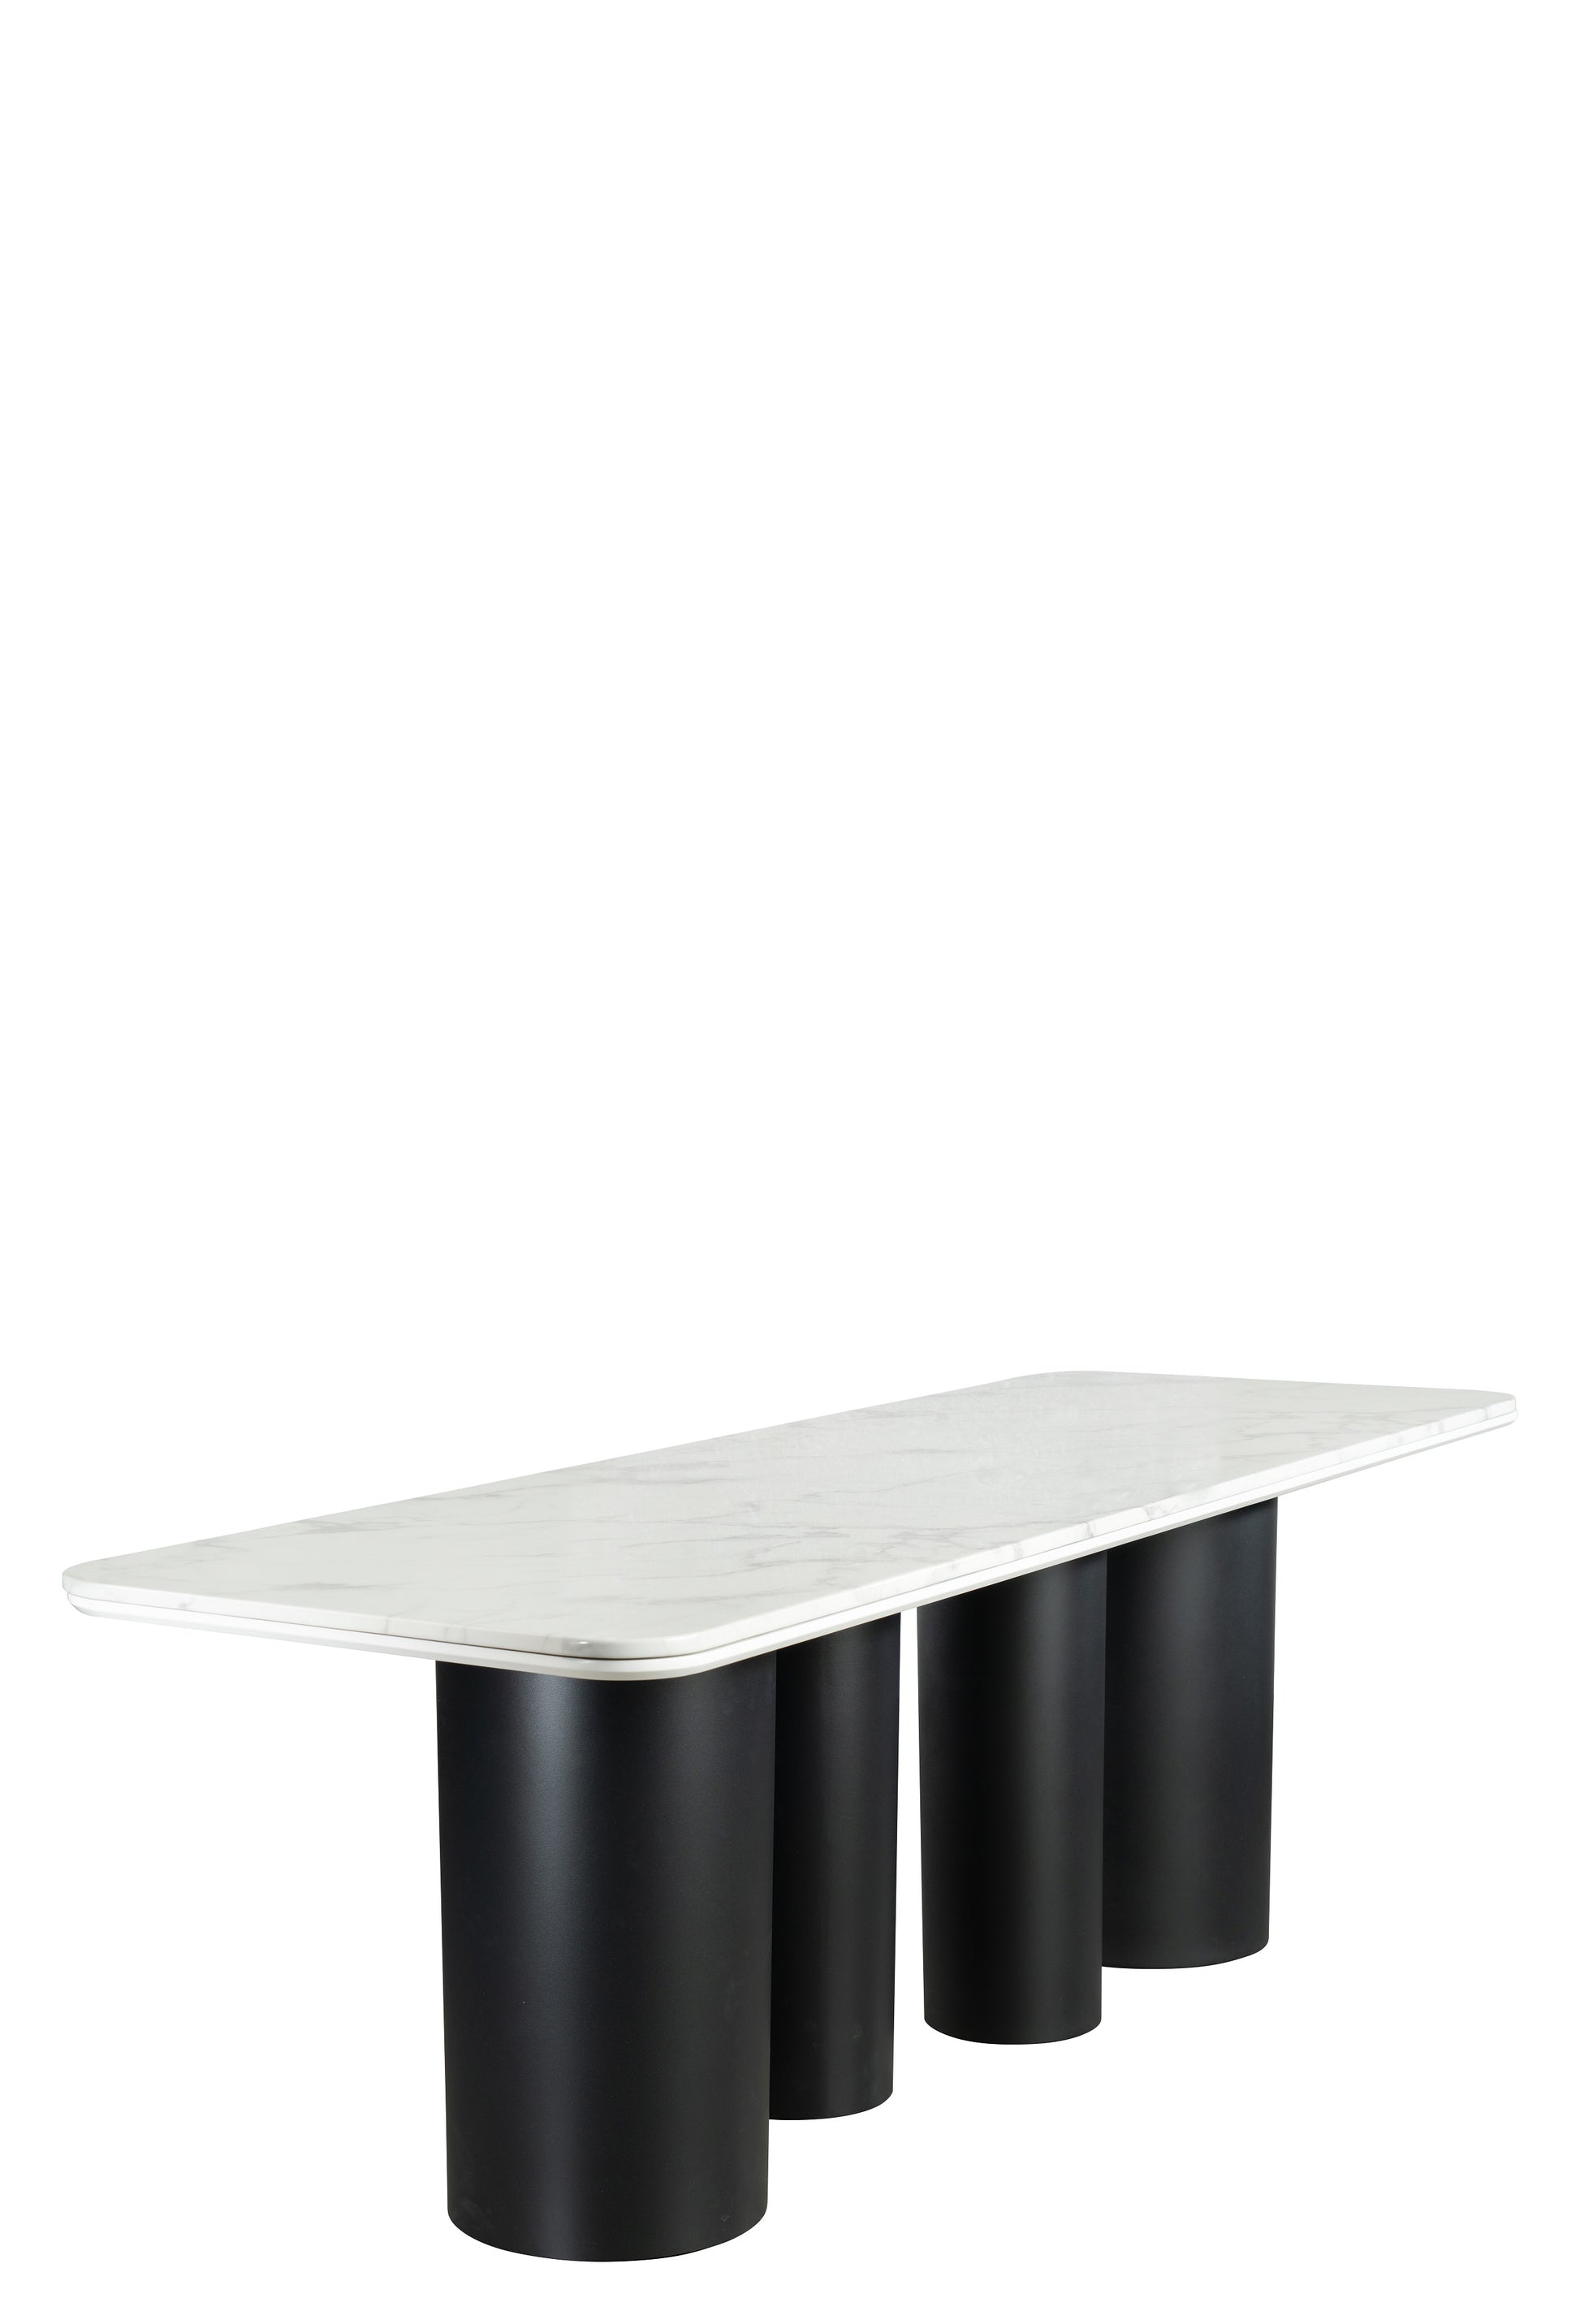 black dining room table 